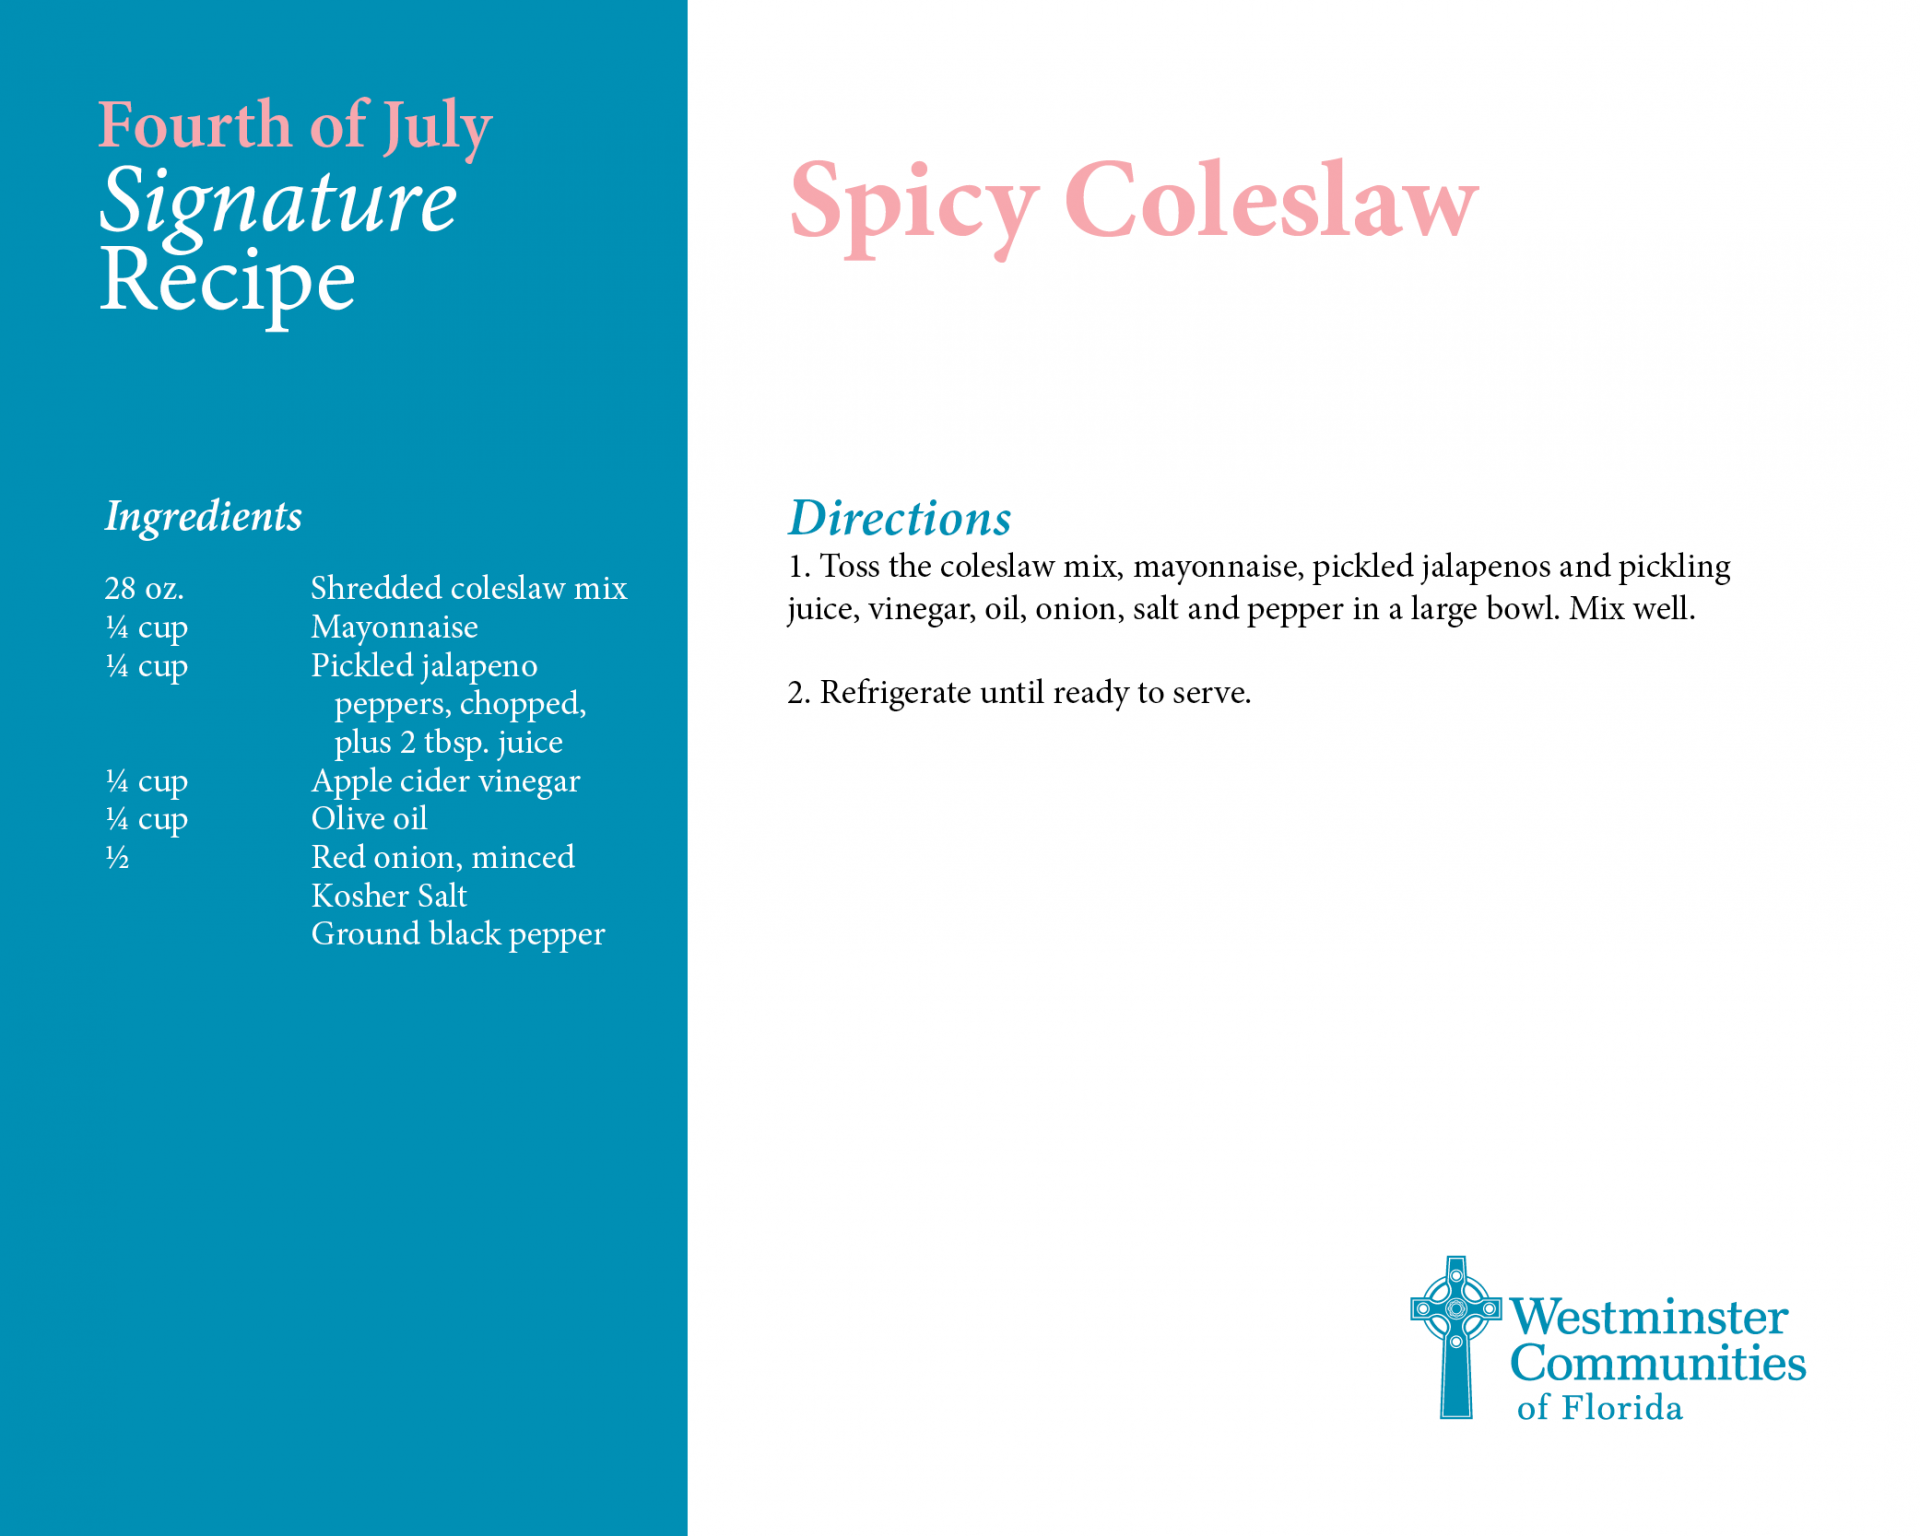 Fourth of July Recipes4 - Spicy Coleslaw